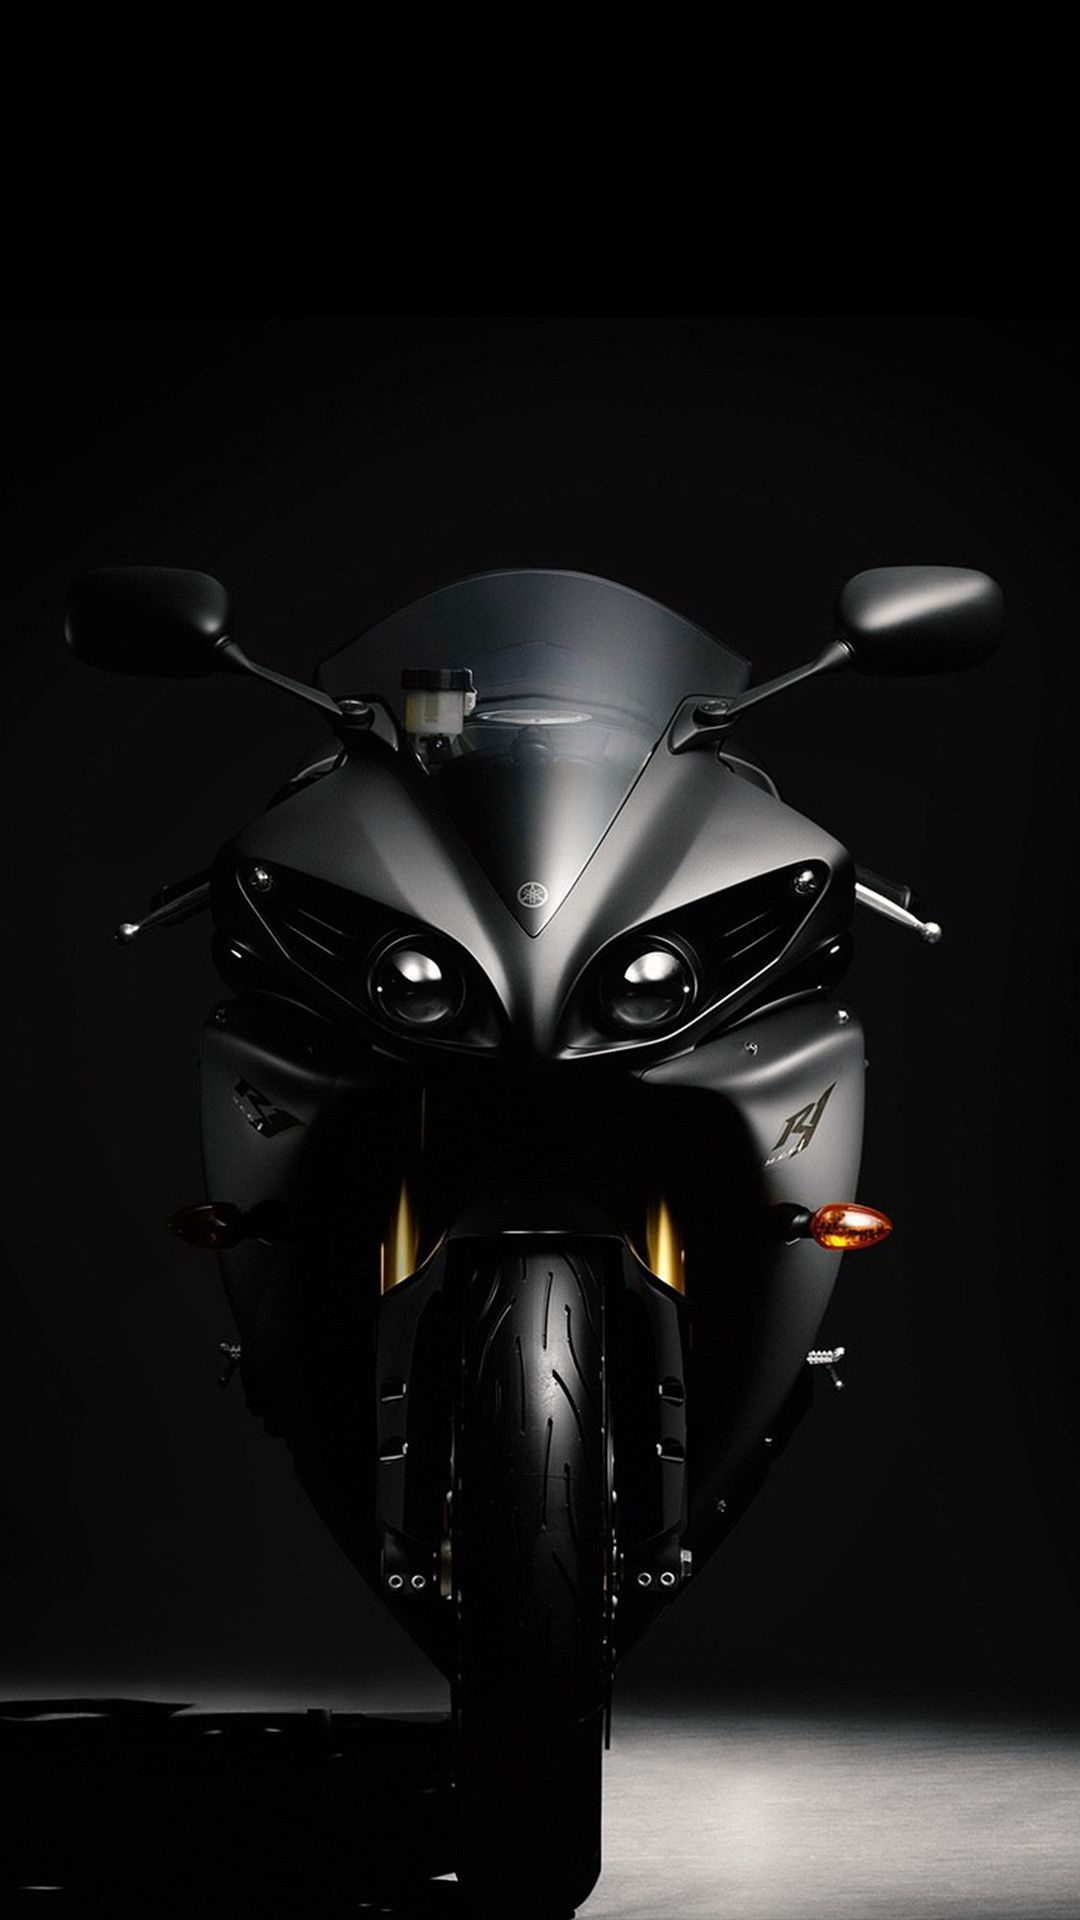 Bike mobile wallpapers, Thrilling rides, Speed and adrenaline, HD quality, 1080x1920 Full HD Handy